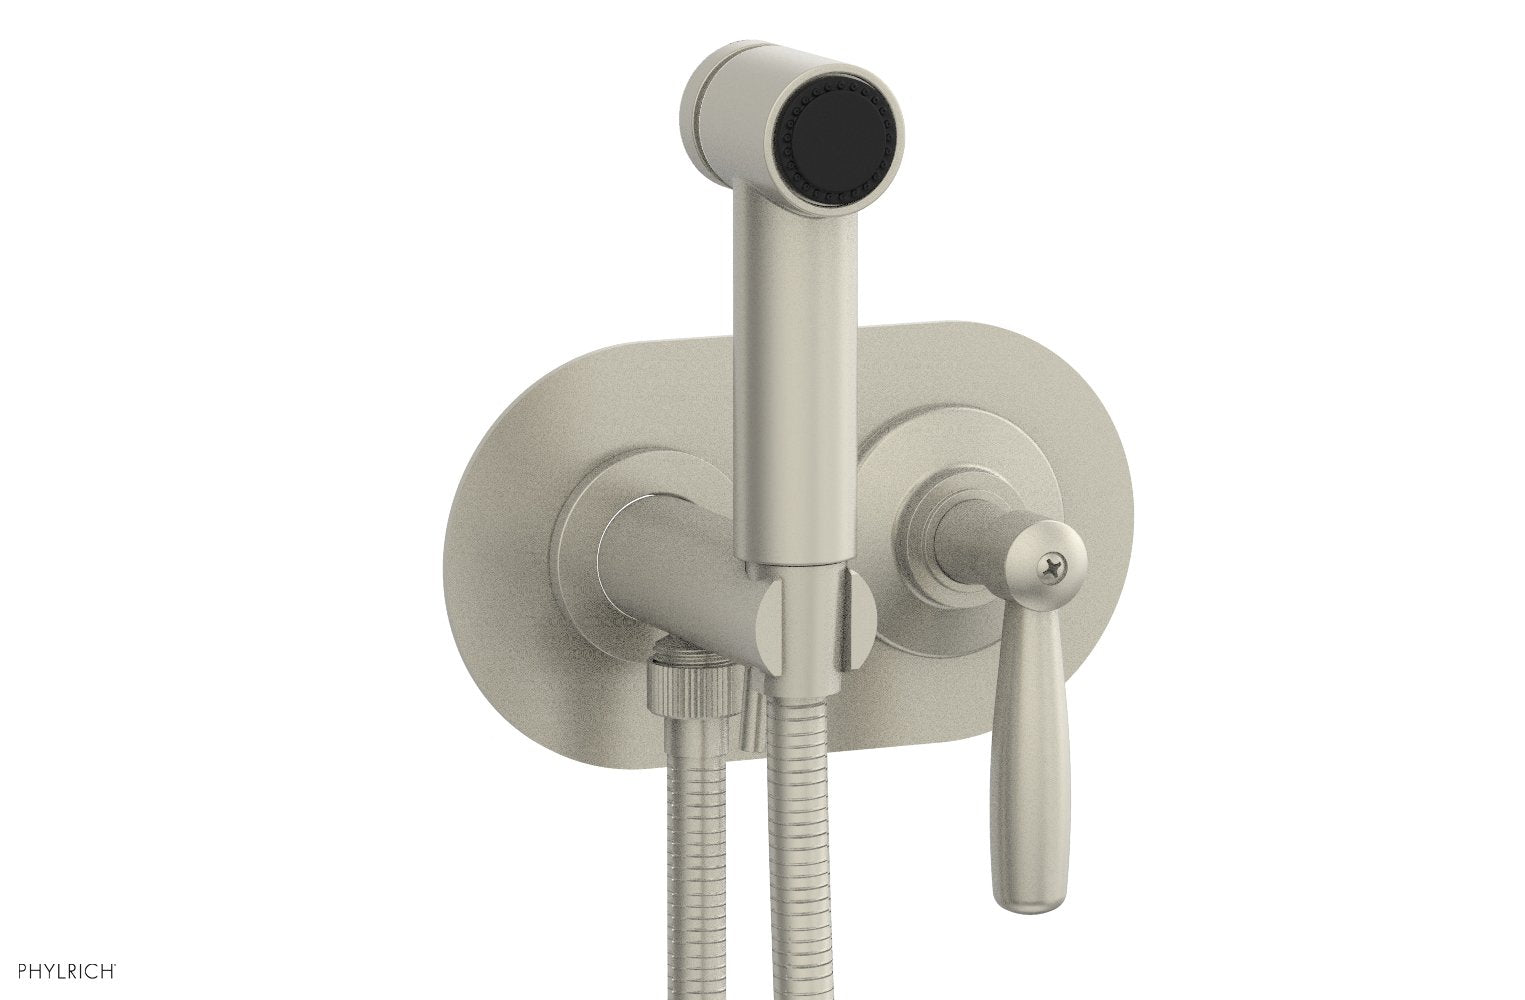 Phylrich WORKS Wall Mounted Bidet, Lever Handle